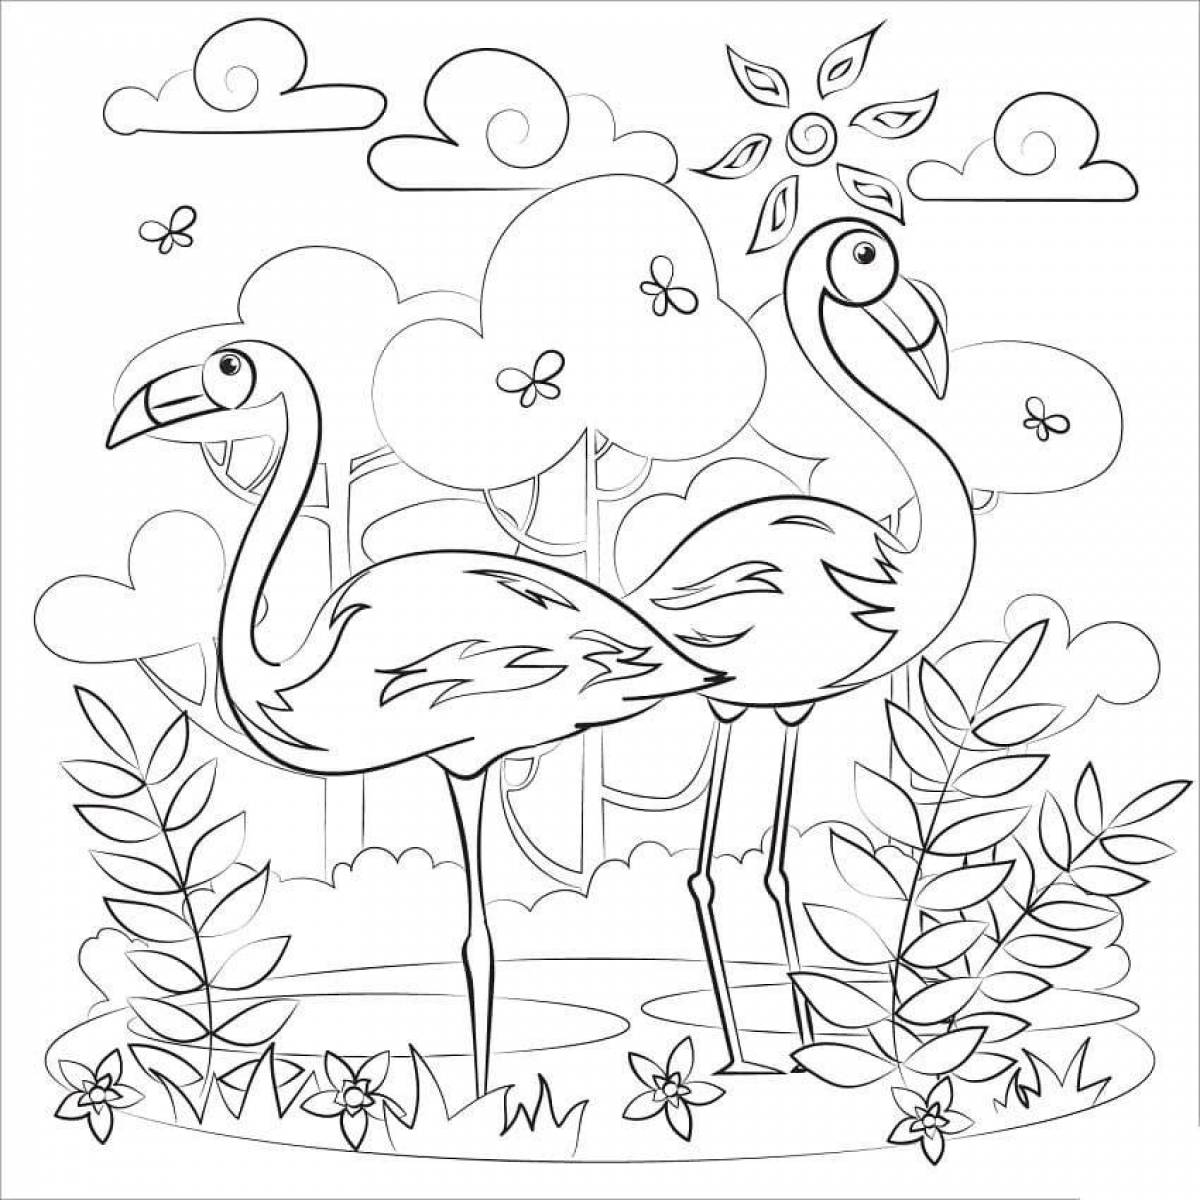 Exquisite flamingo coloring pages for kids